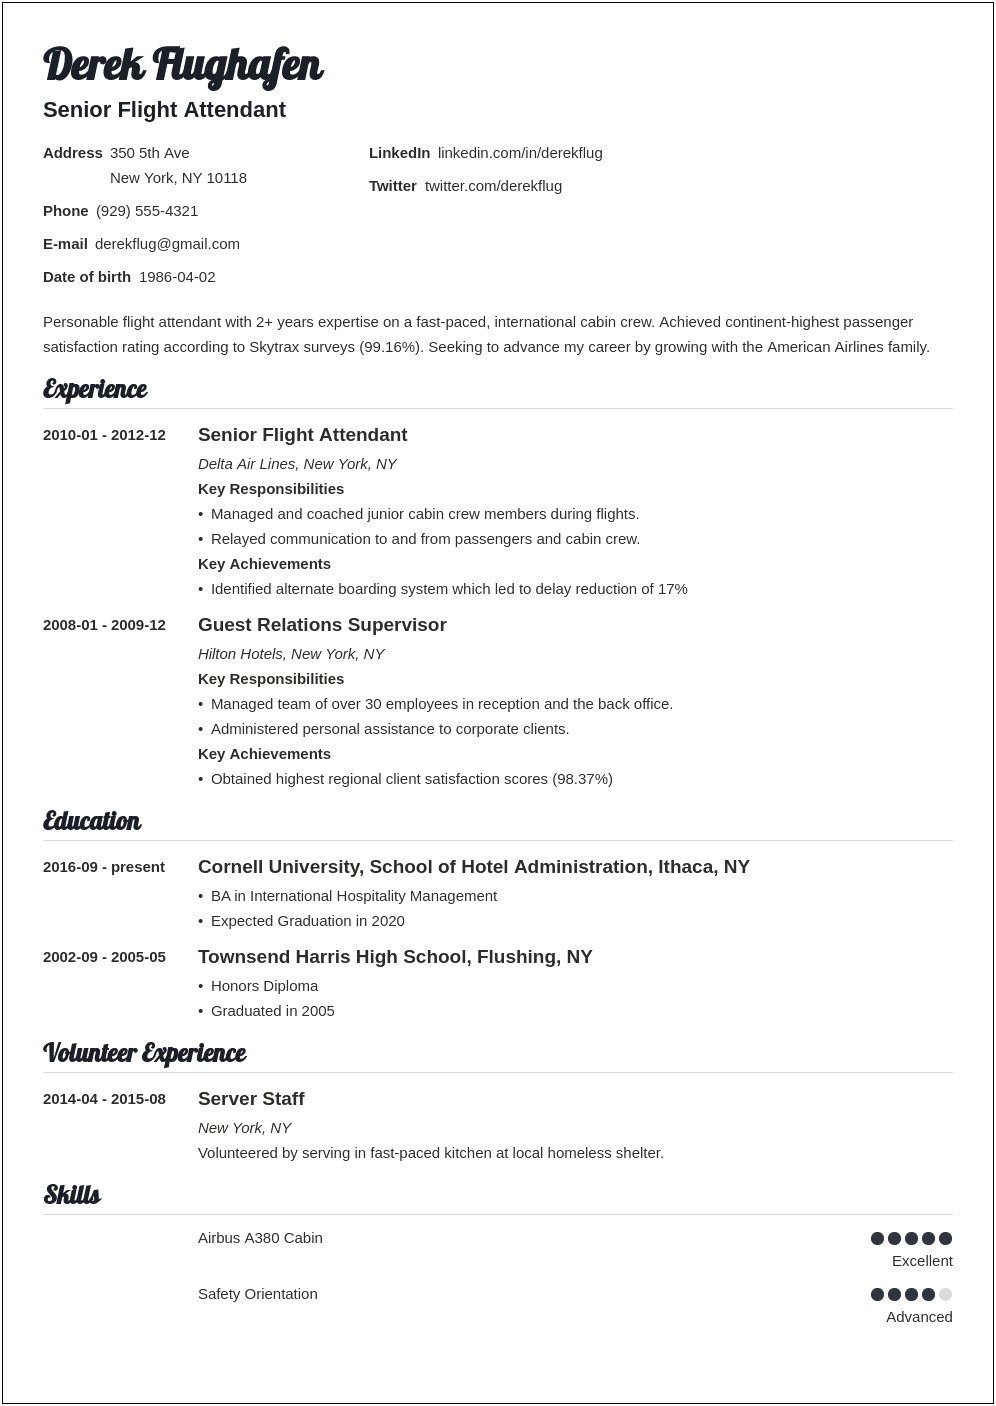 Resume For Cabin Crew With Experience